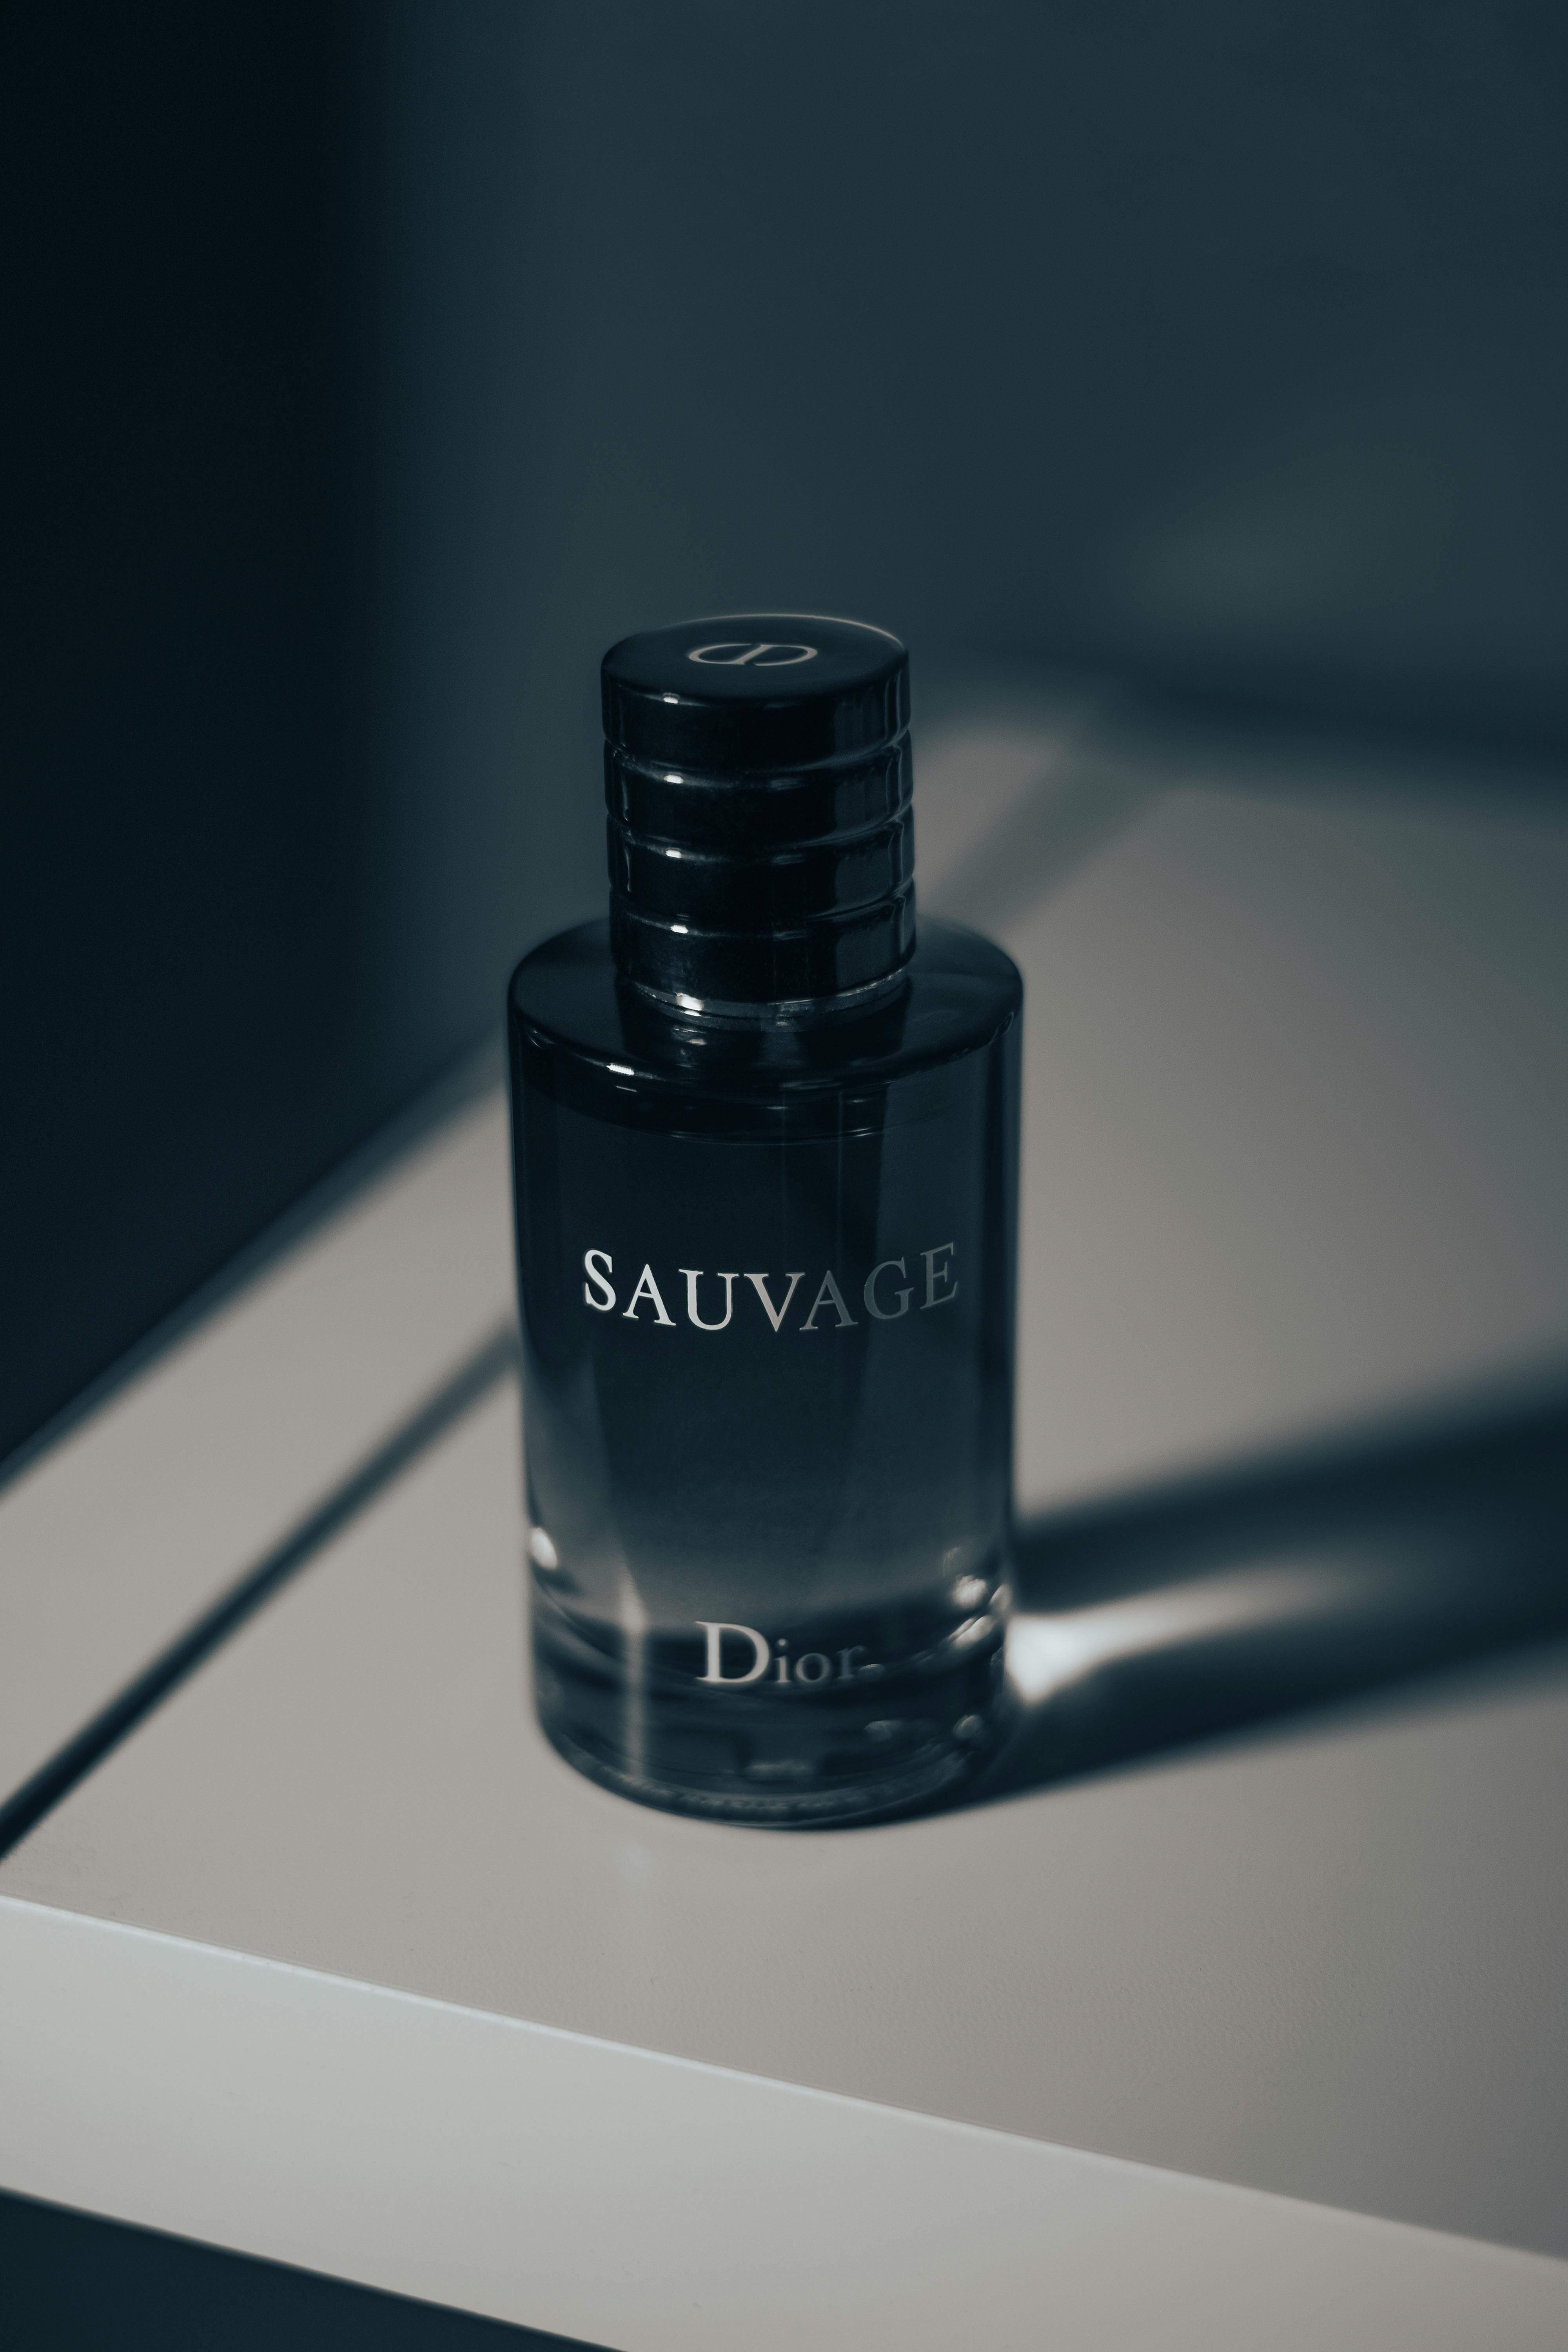 SAUVAGE Parfum by Dior Aftershave Perfume Fragrance for Men by French  Fashion House Christian Dior Usa March 2020  Stock Editorial Photo   Cvenskor 370933288